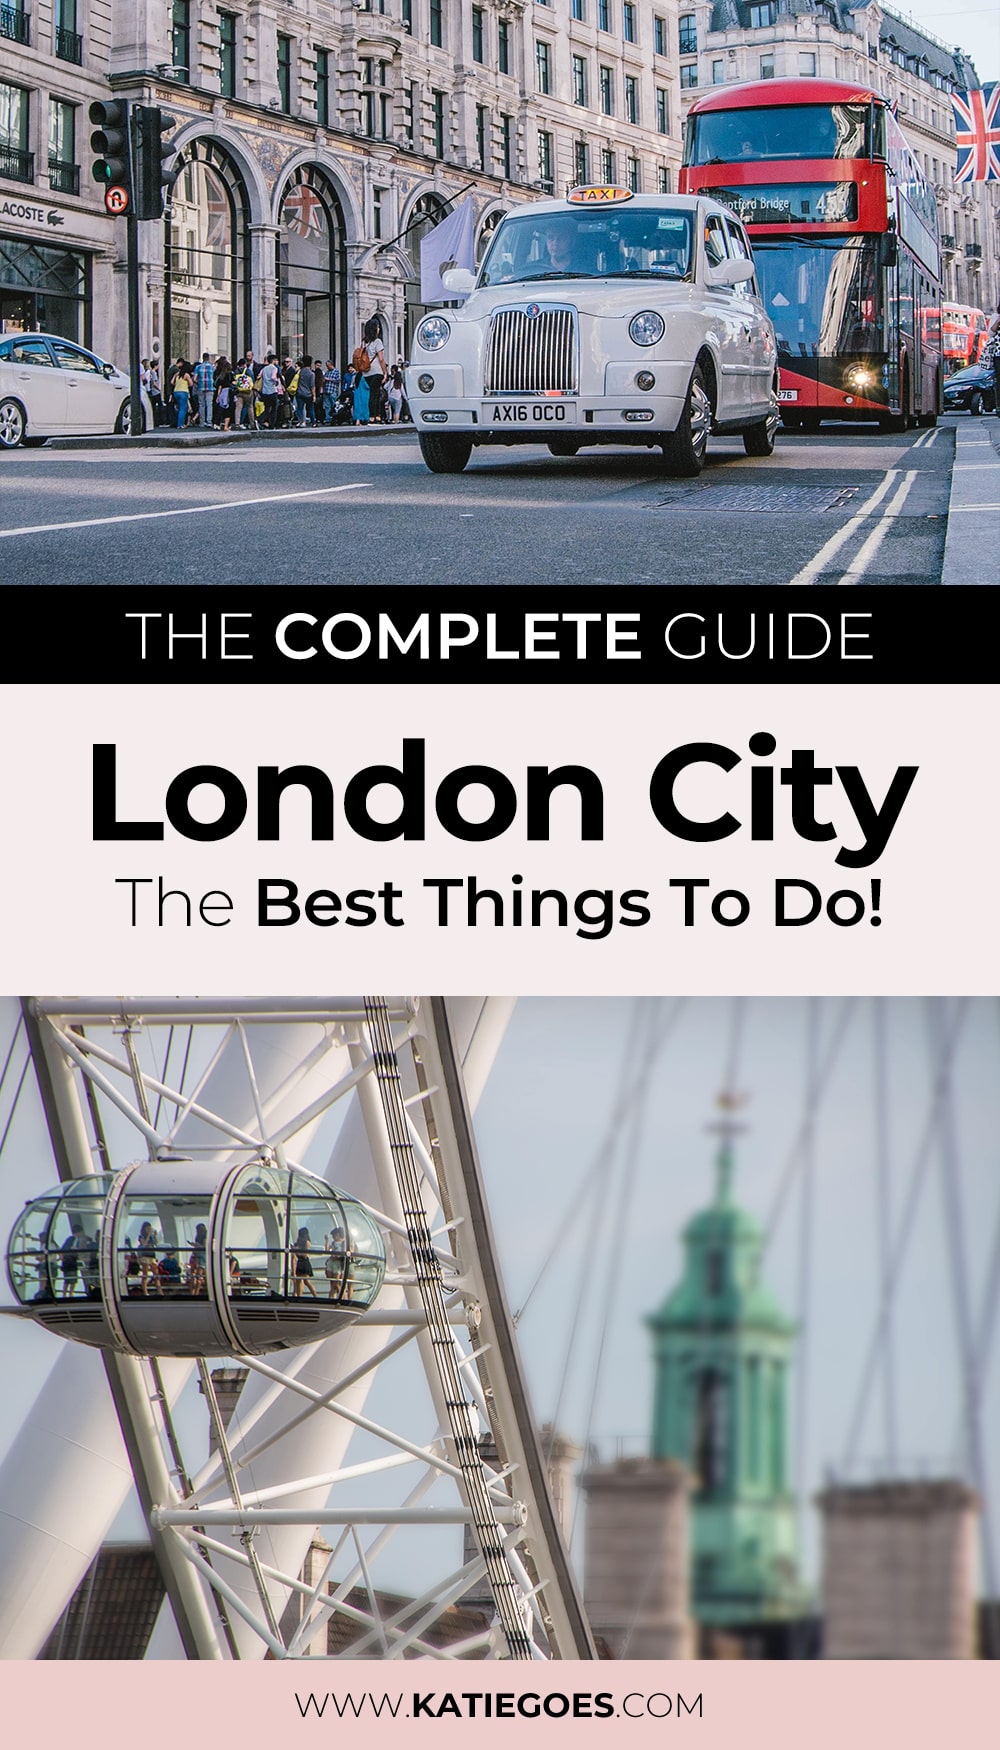 The Complete Guide to the Best Fun Things To Do in London